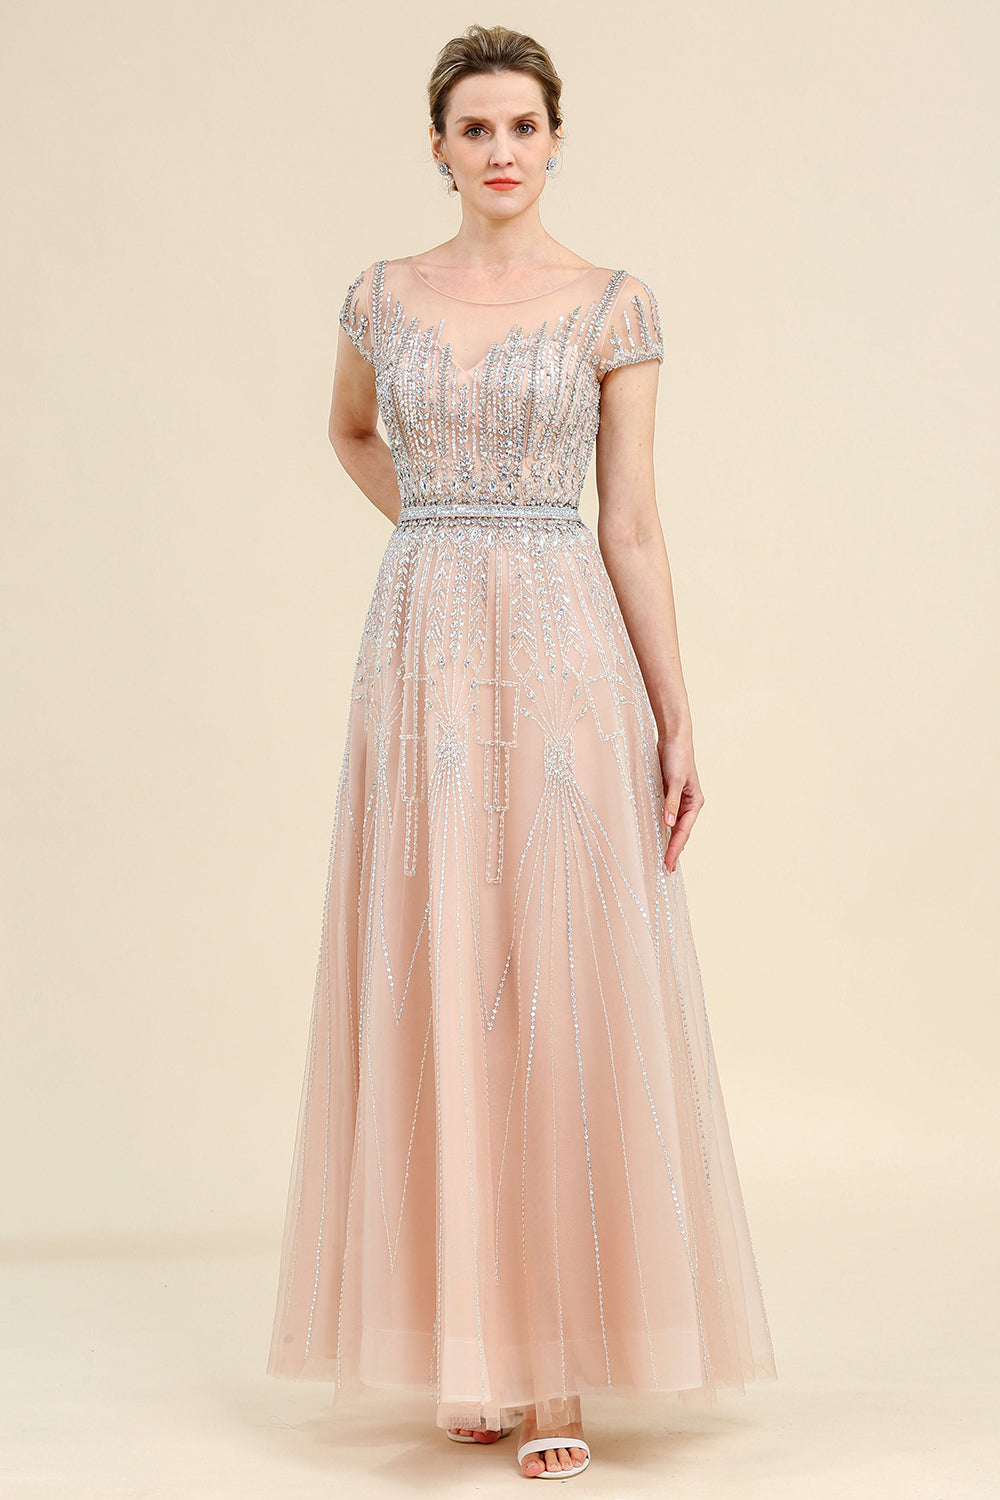 Blush A Line Beaded Mother of Bride Dress With Short Sleeves